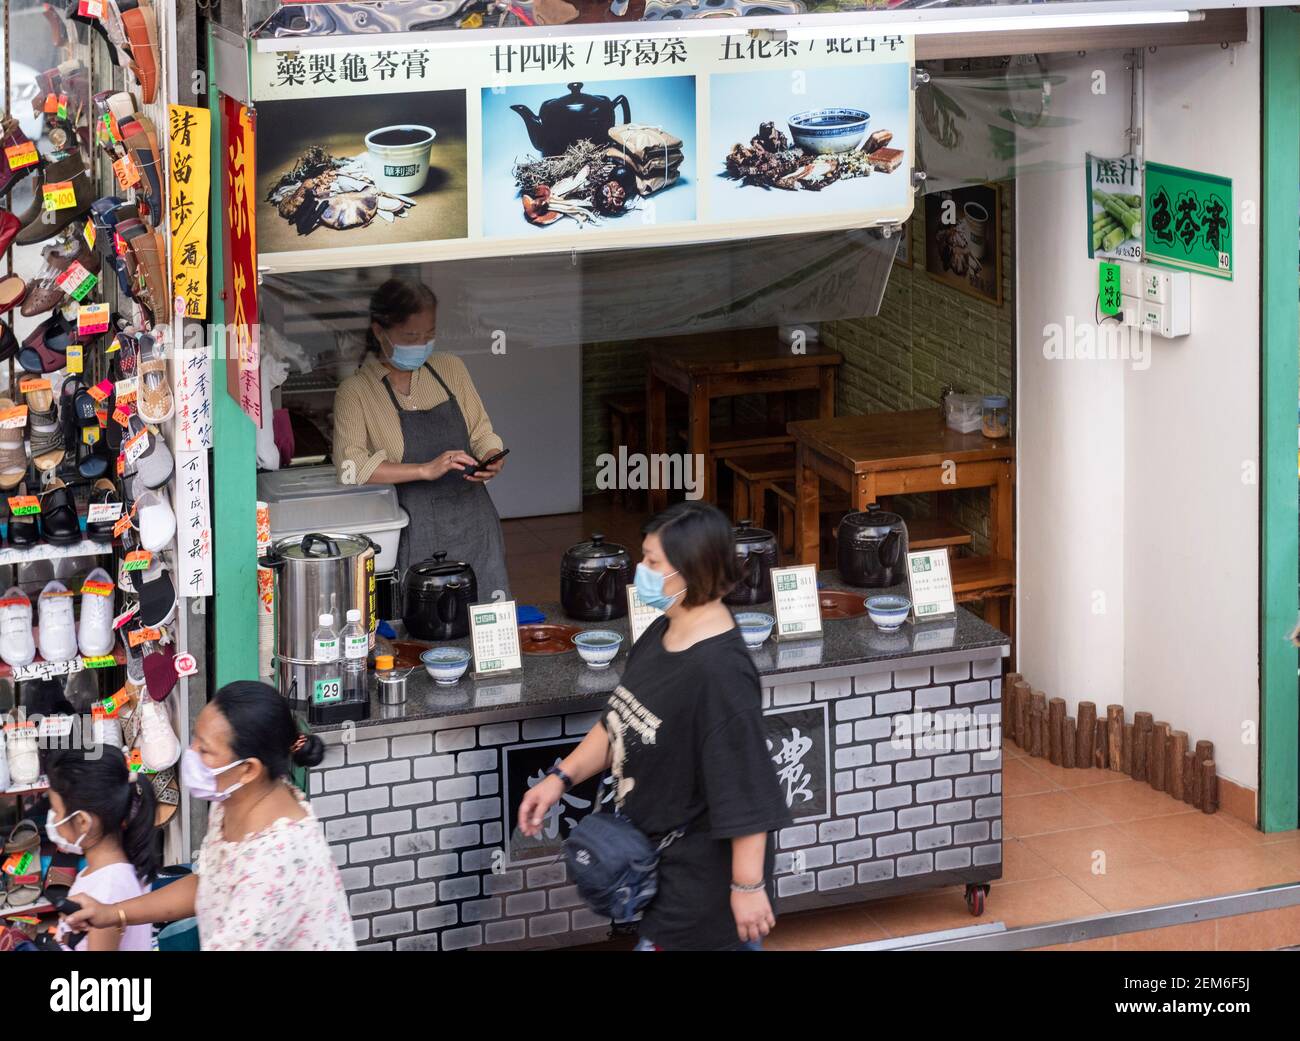 Hong Kong,China:11 Oct,2020.   A lady serves tea from a roadside tea and soup stand in Jordan Hong Kong Alamy Stock Image/Jayne Russell Stock Photo